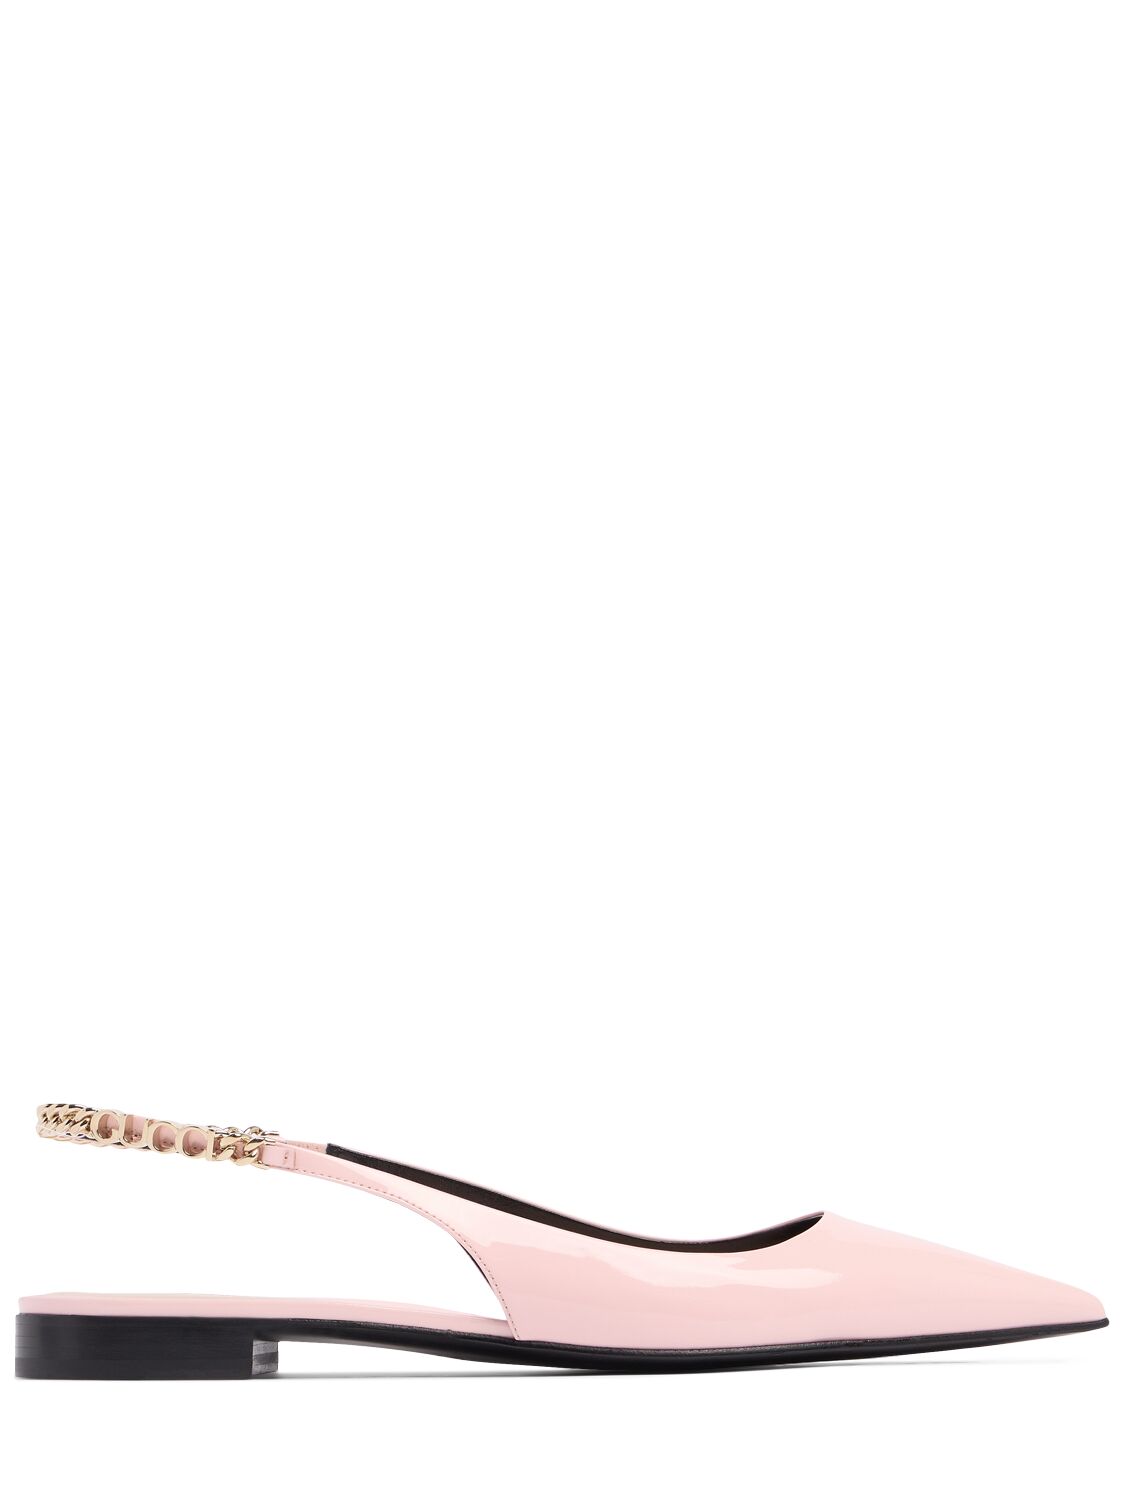 Gucci Signoria Leather Slingback Flats In Candy Cotton